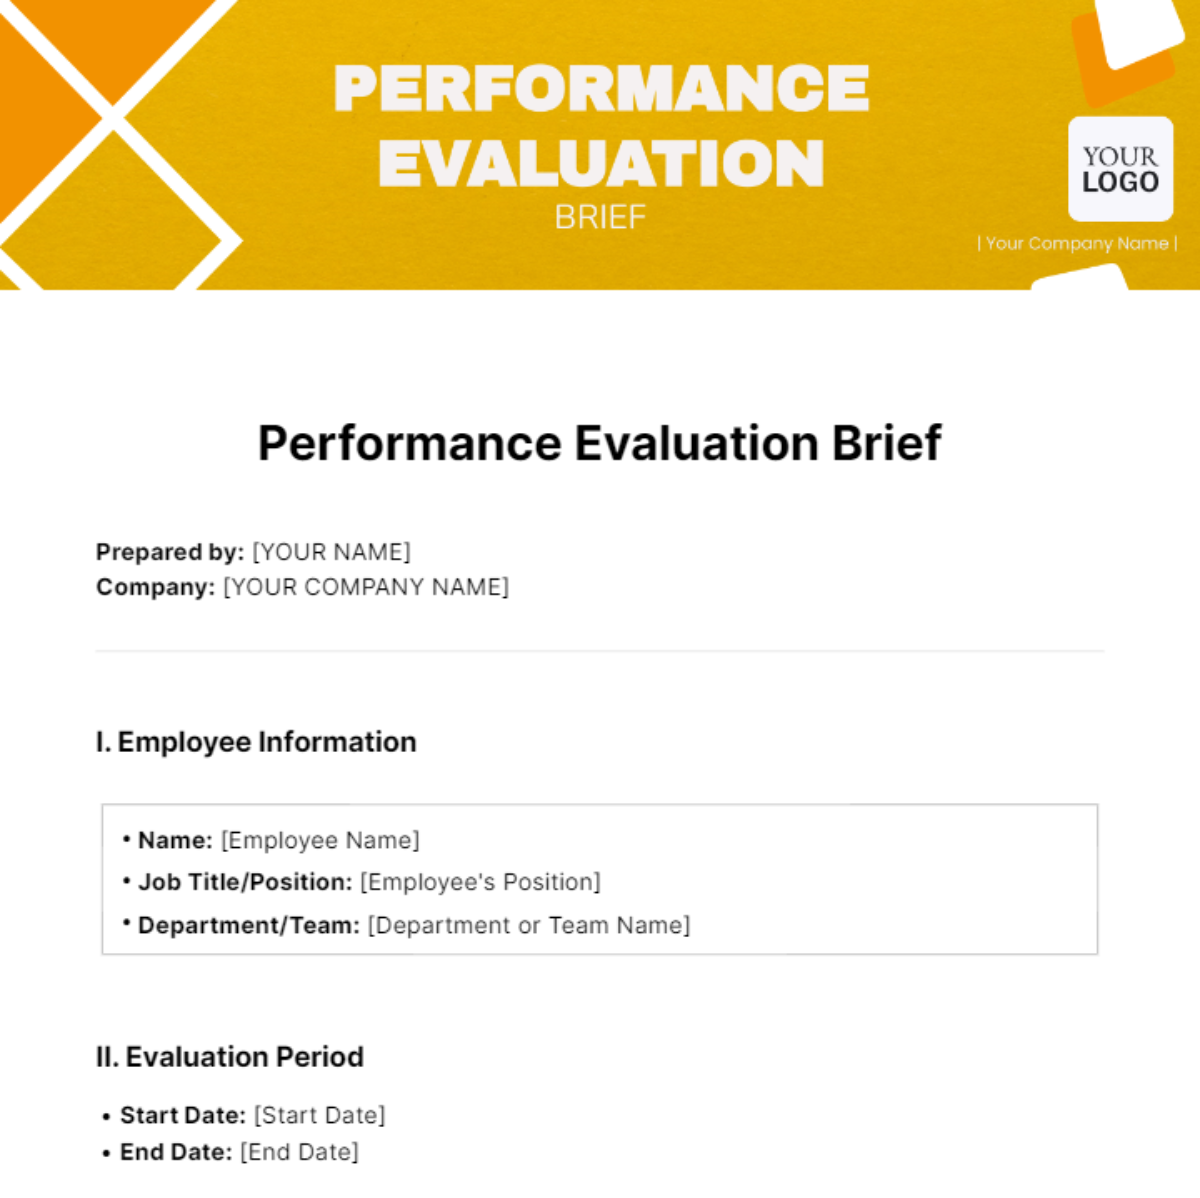 Performance Evaluation Brief Template